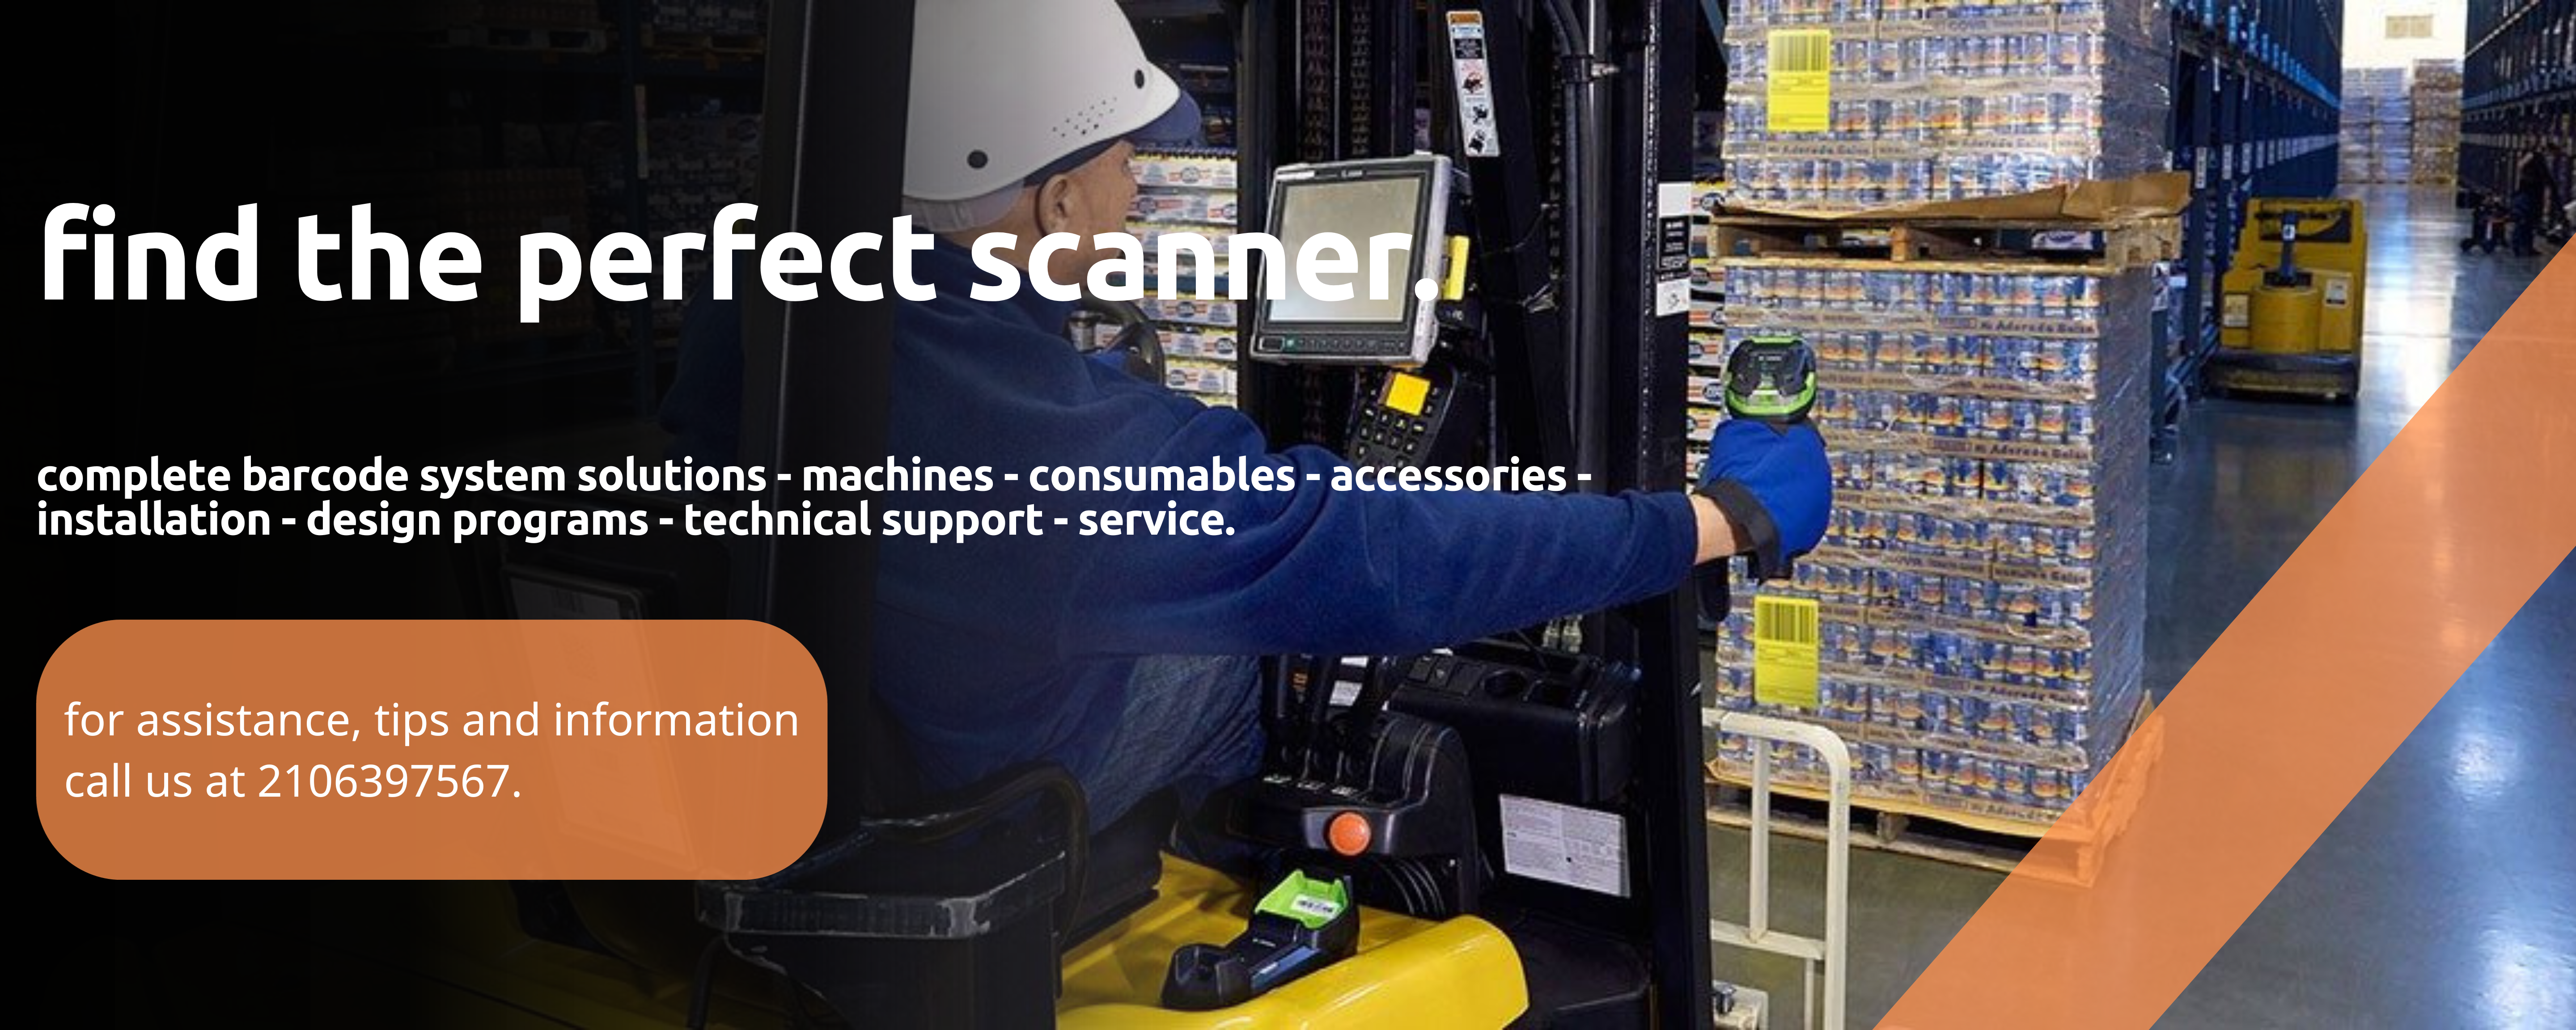 barcode_scanners_product_category_blp_connexion